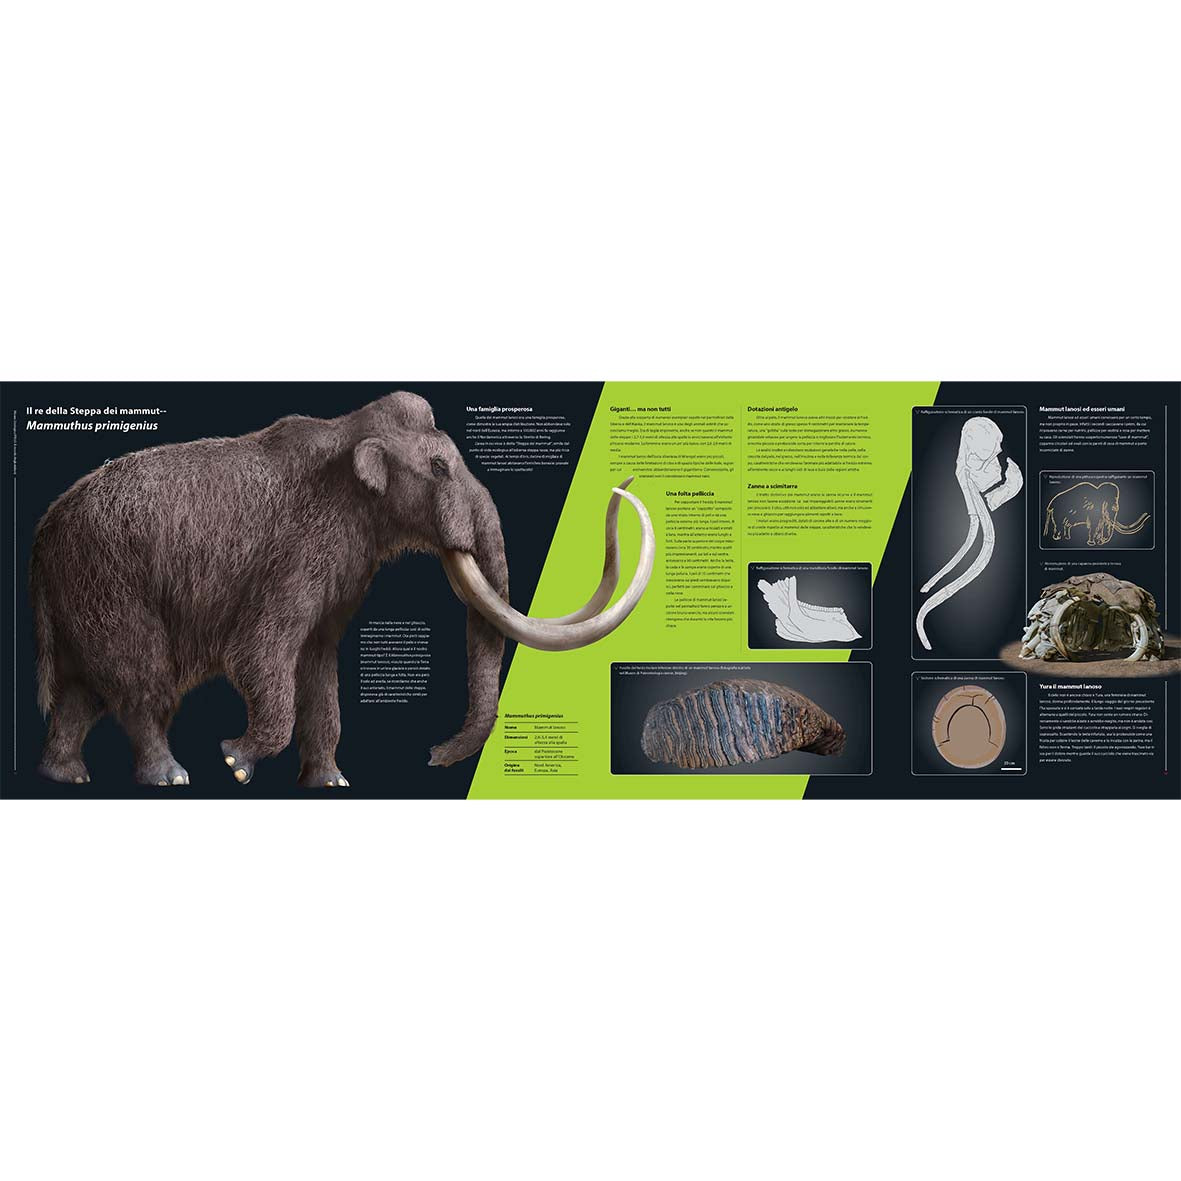 In the footsteps of the mammoths - From the first trunks to today's elephants